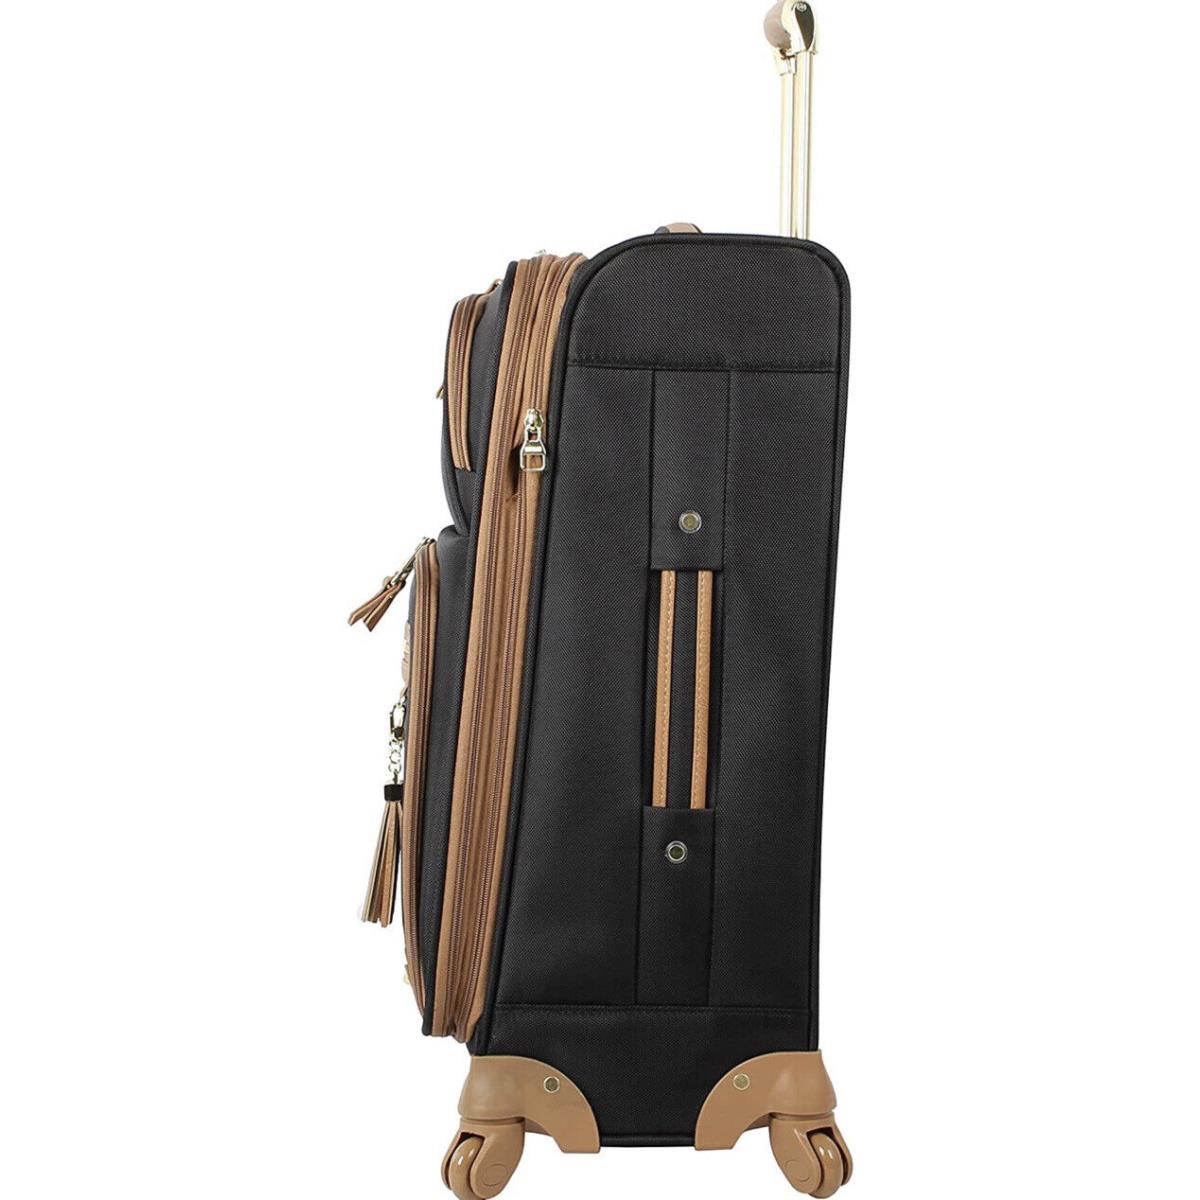 Steve Madden Designer 28 Carry On Luggage Collection-lightweight Suitcase